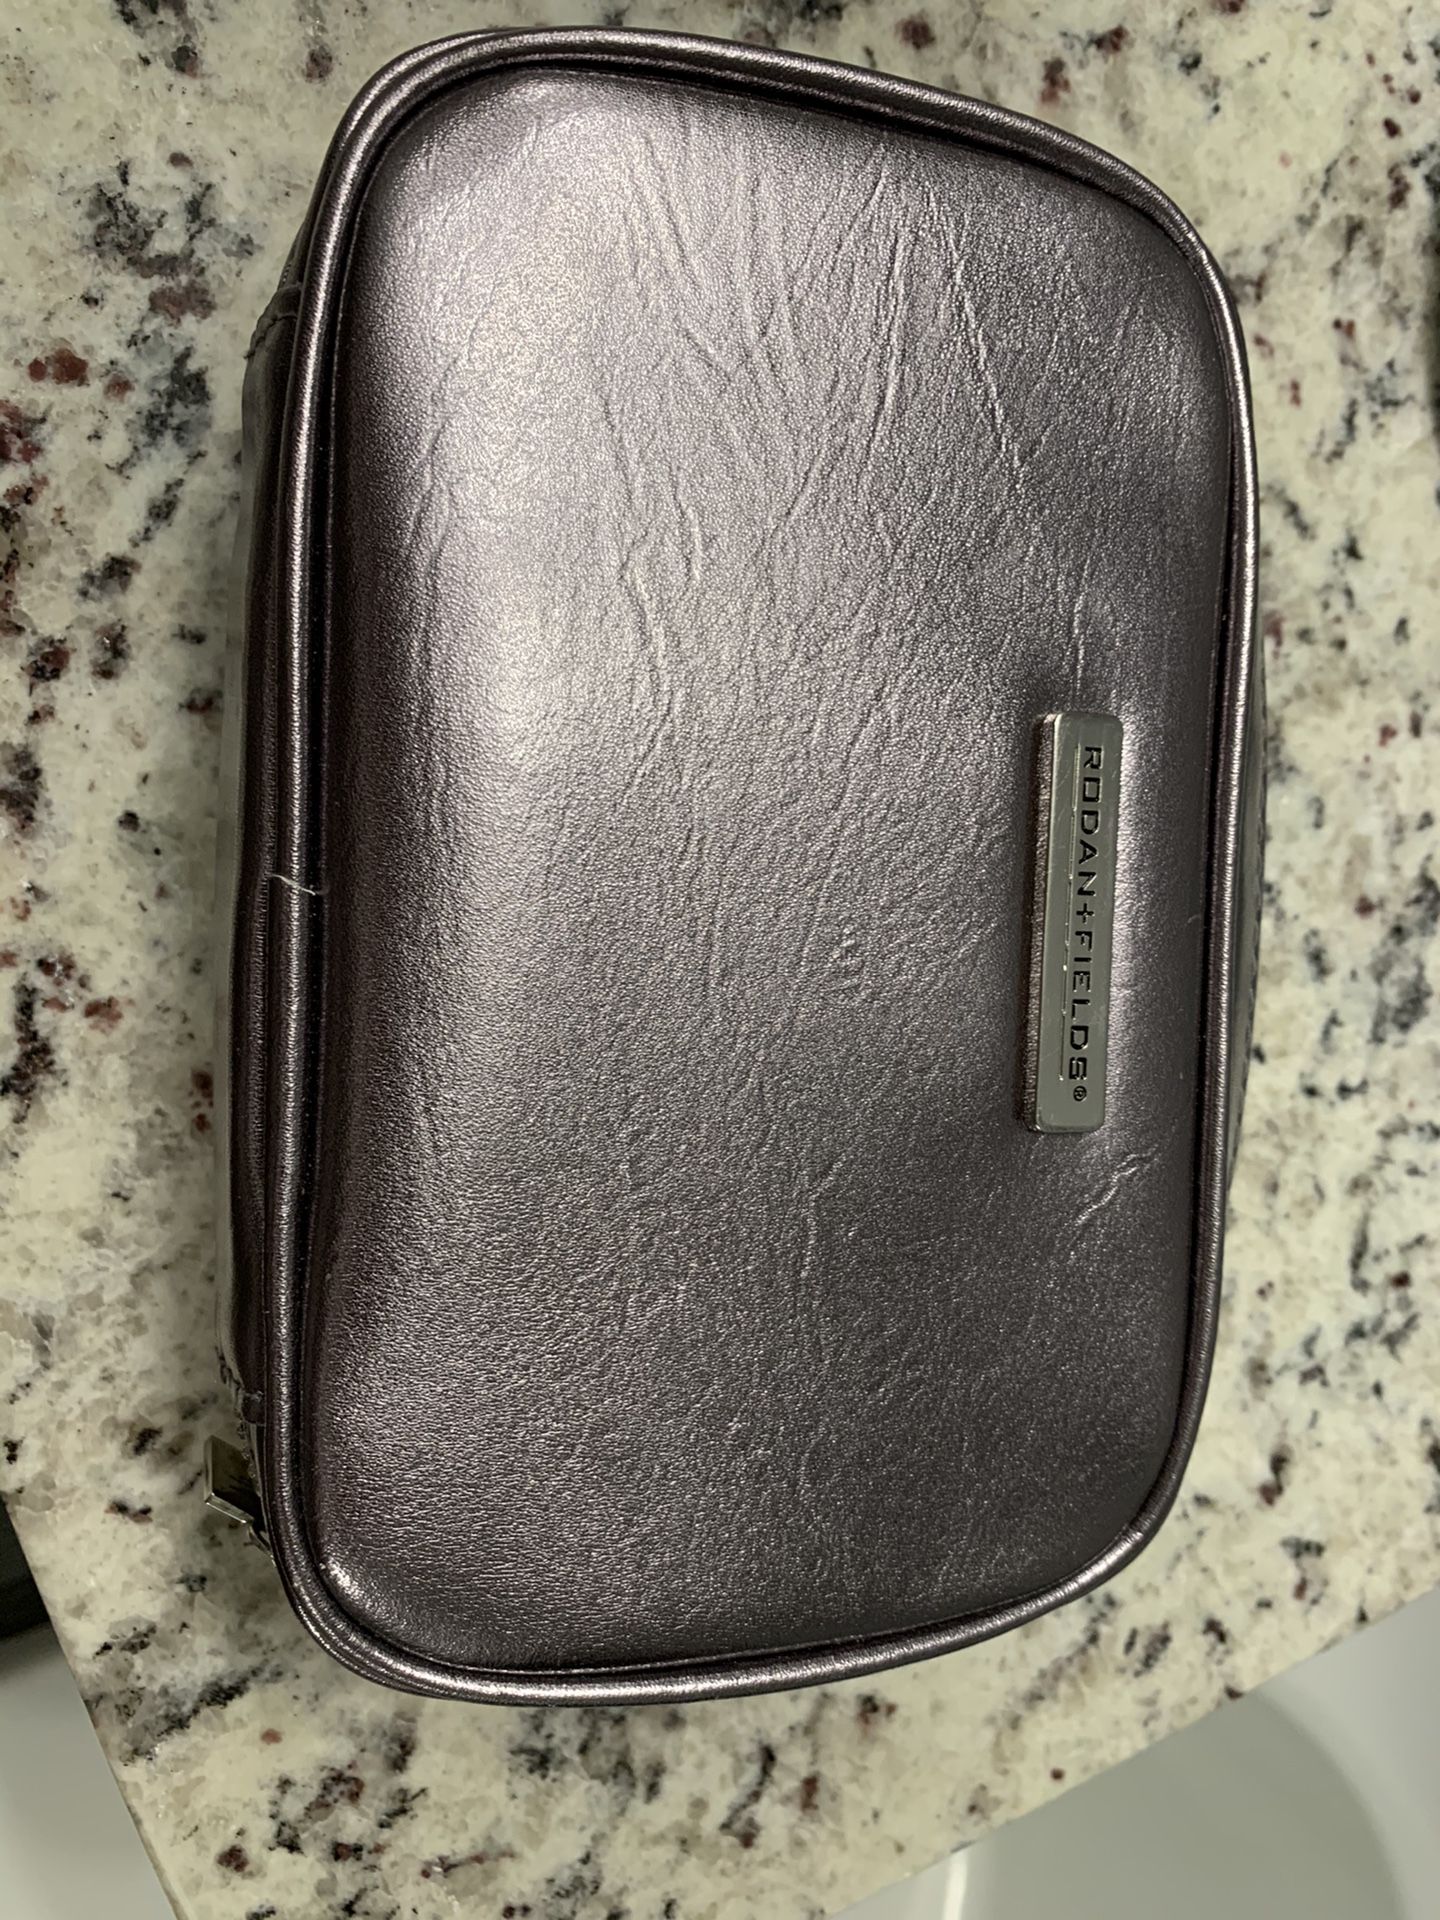 Rodan and Fields makeup case with mirror